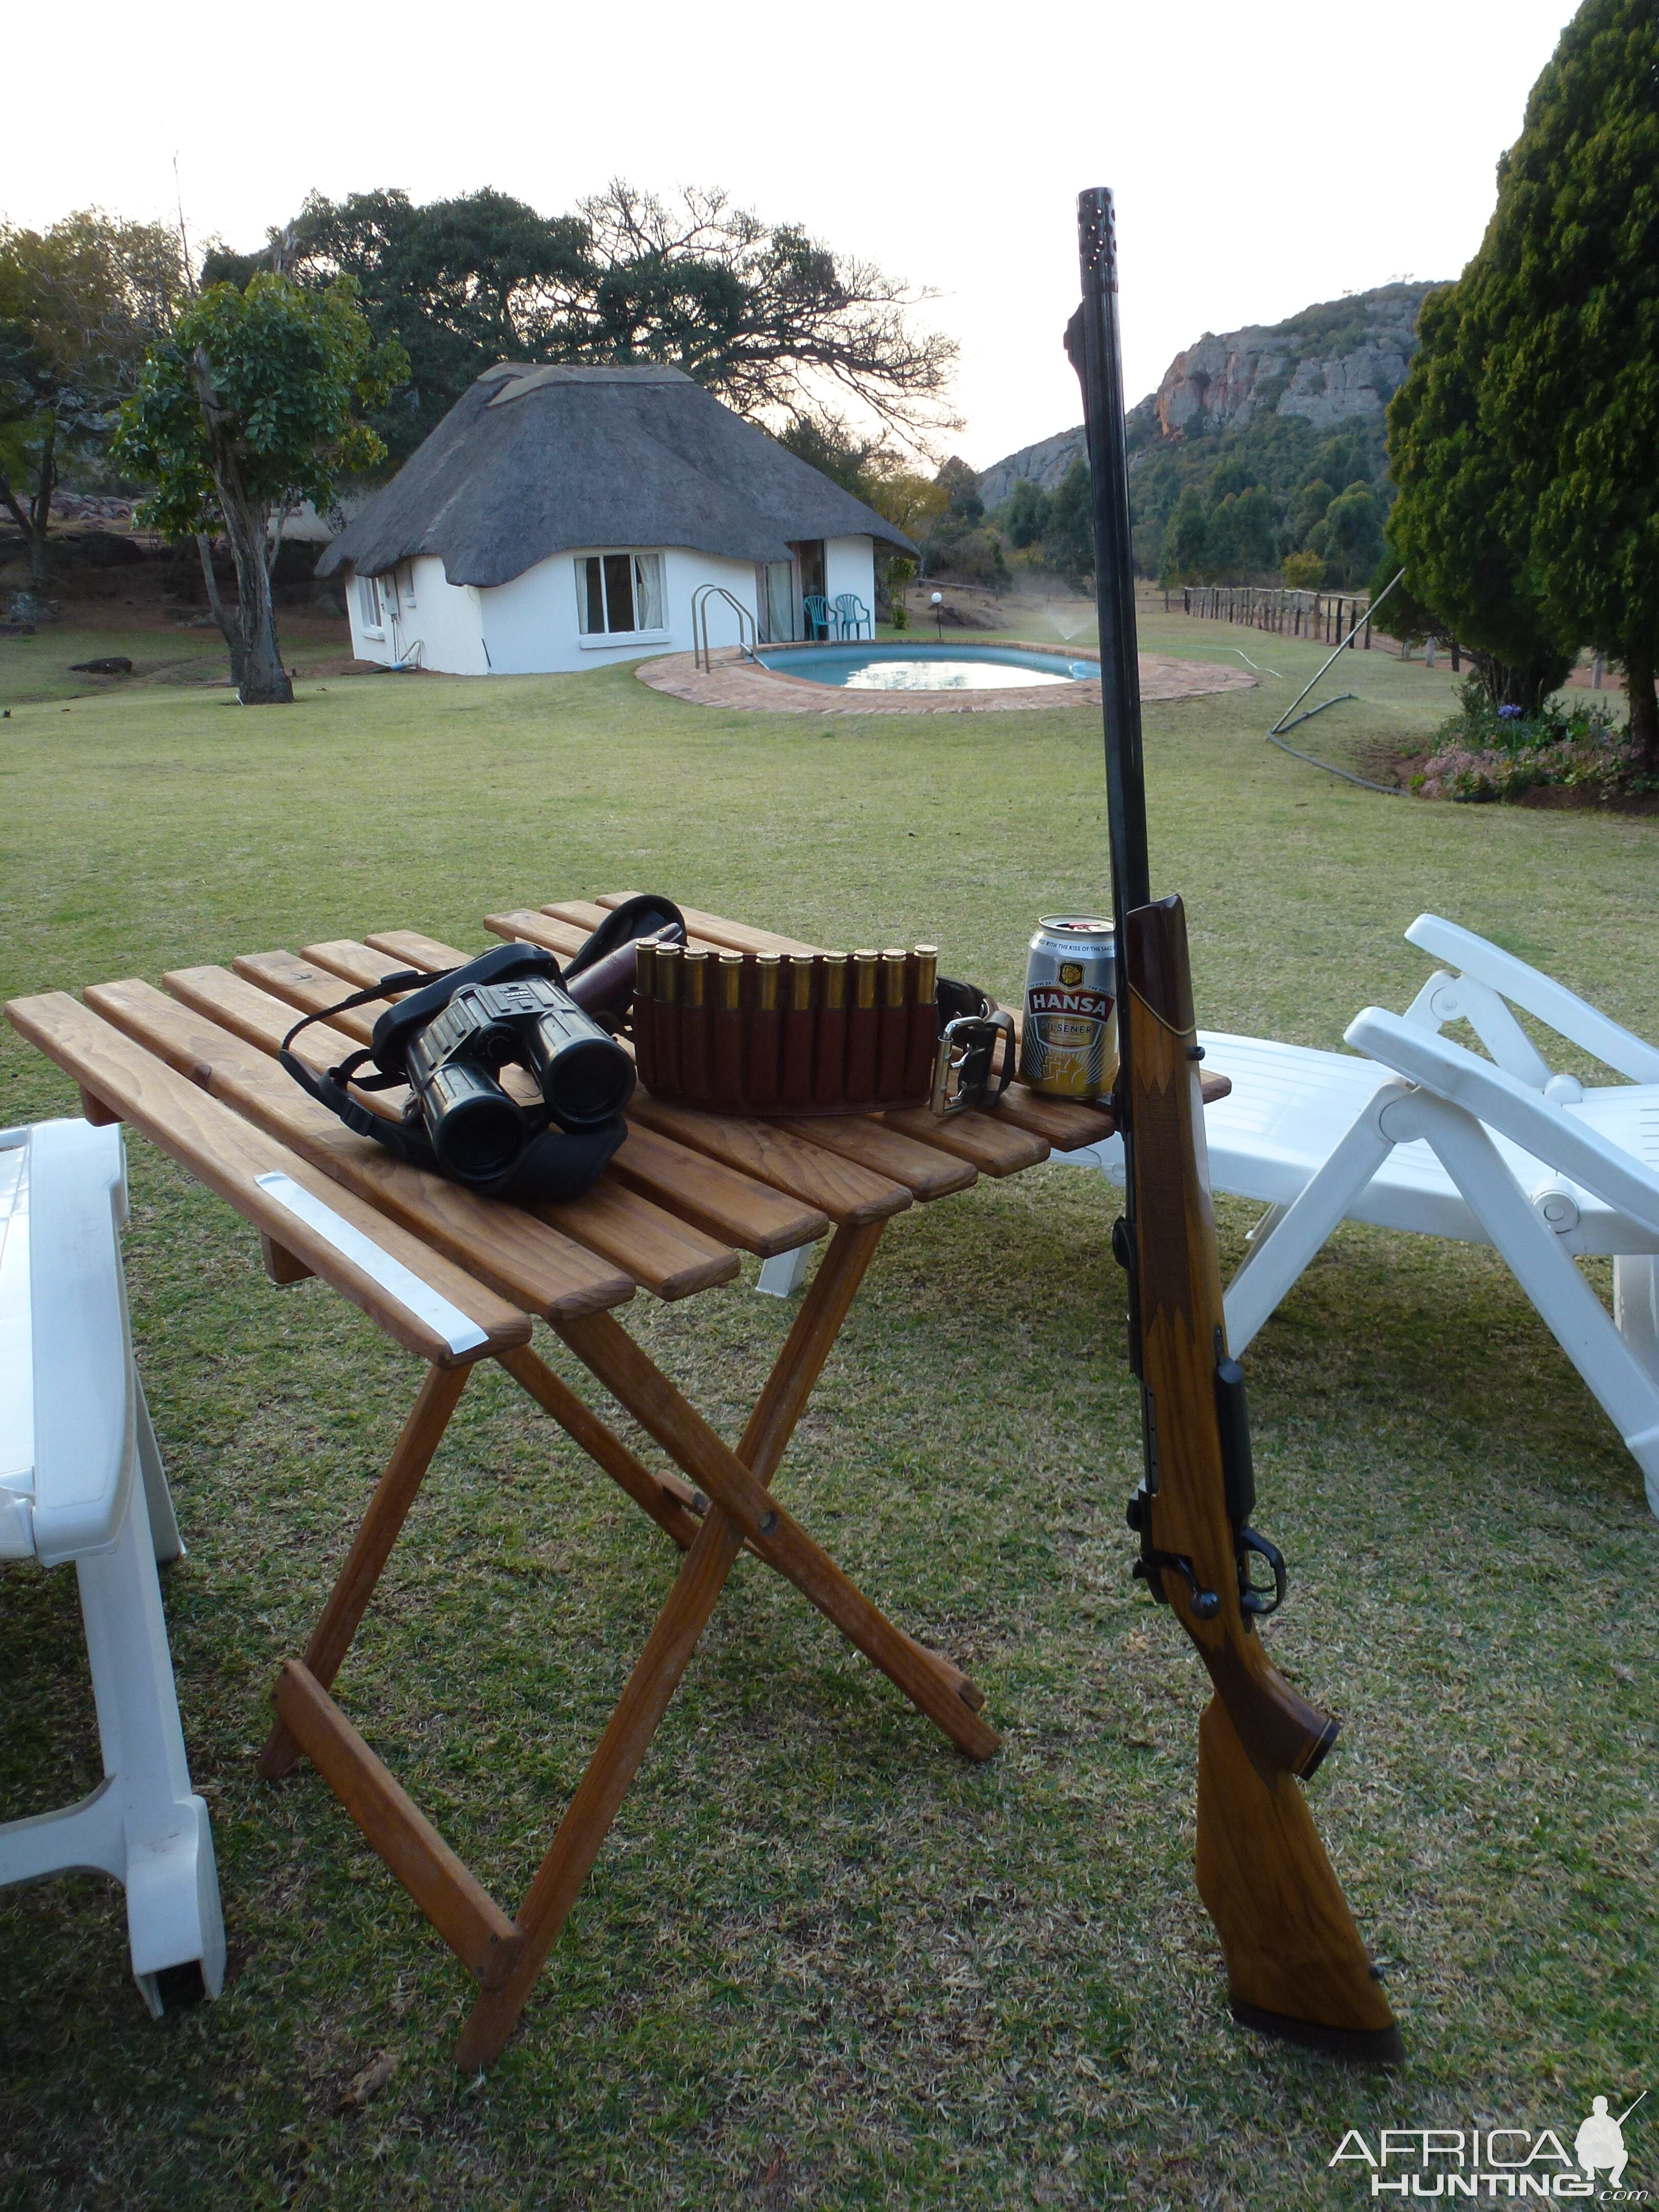 Africa 2015, Drop off my 460 Wby and drink a fresh beer after a dusty day in the bush..